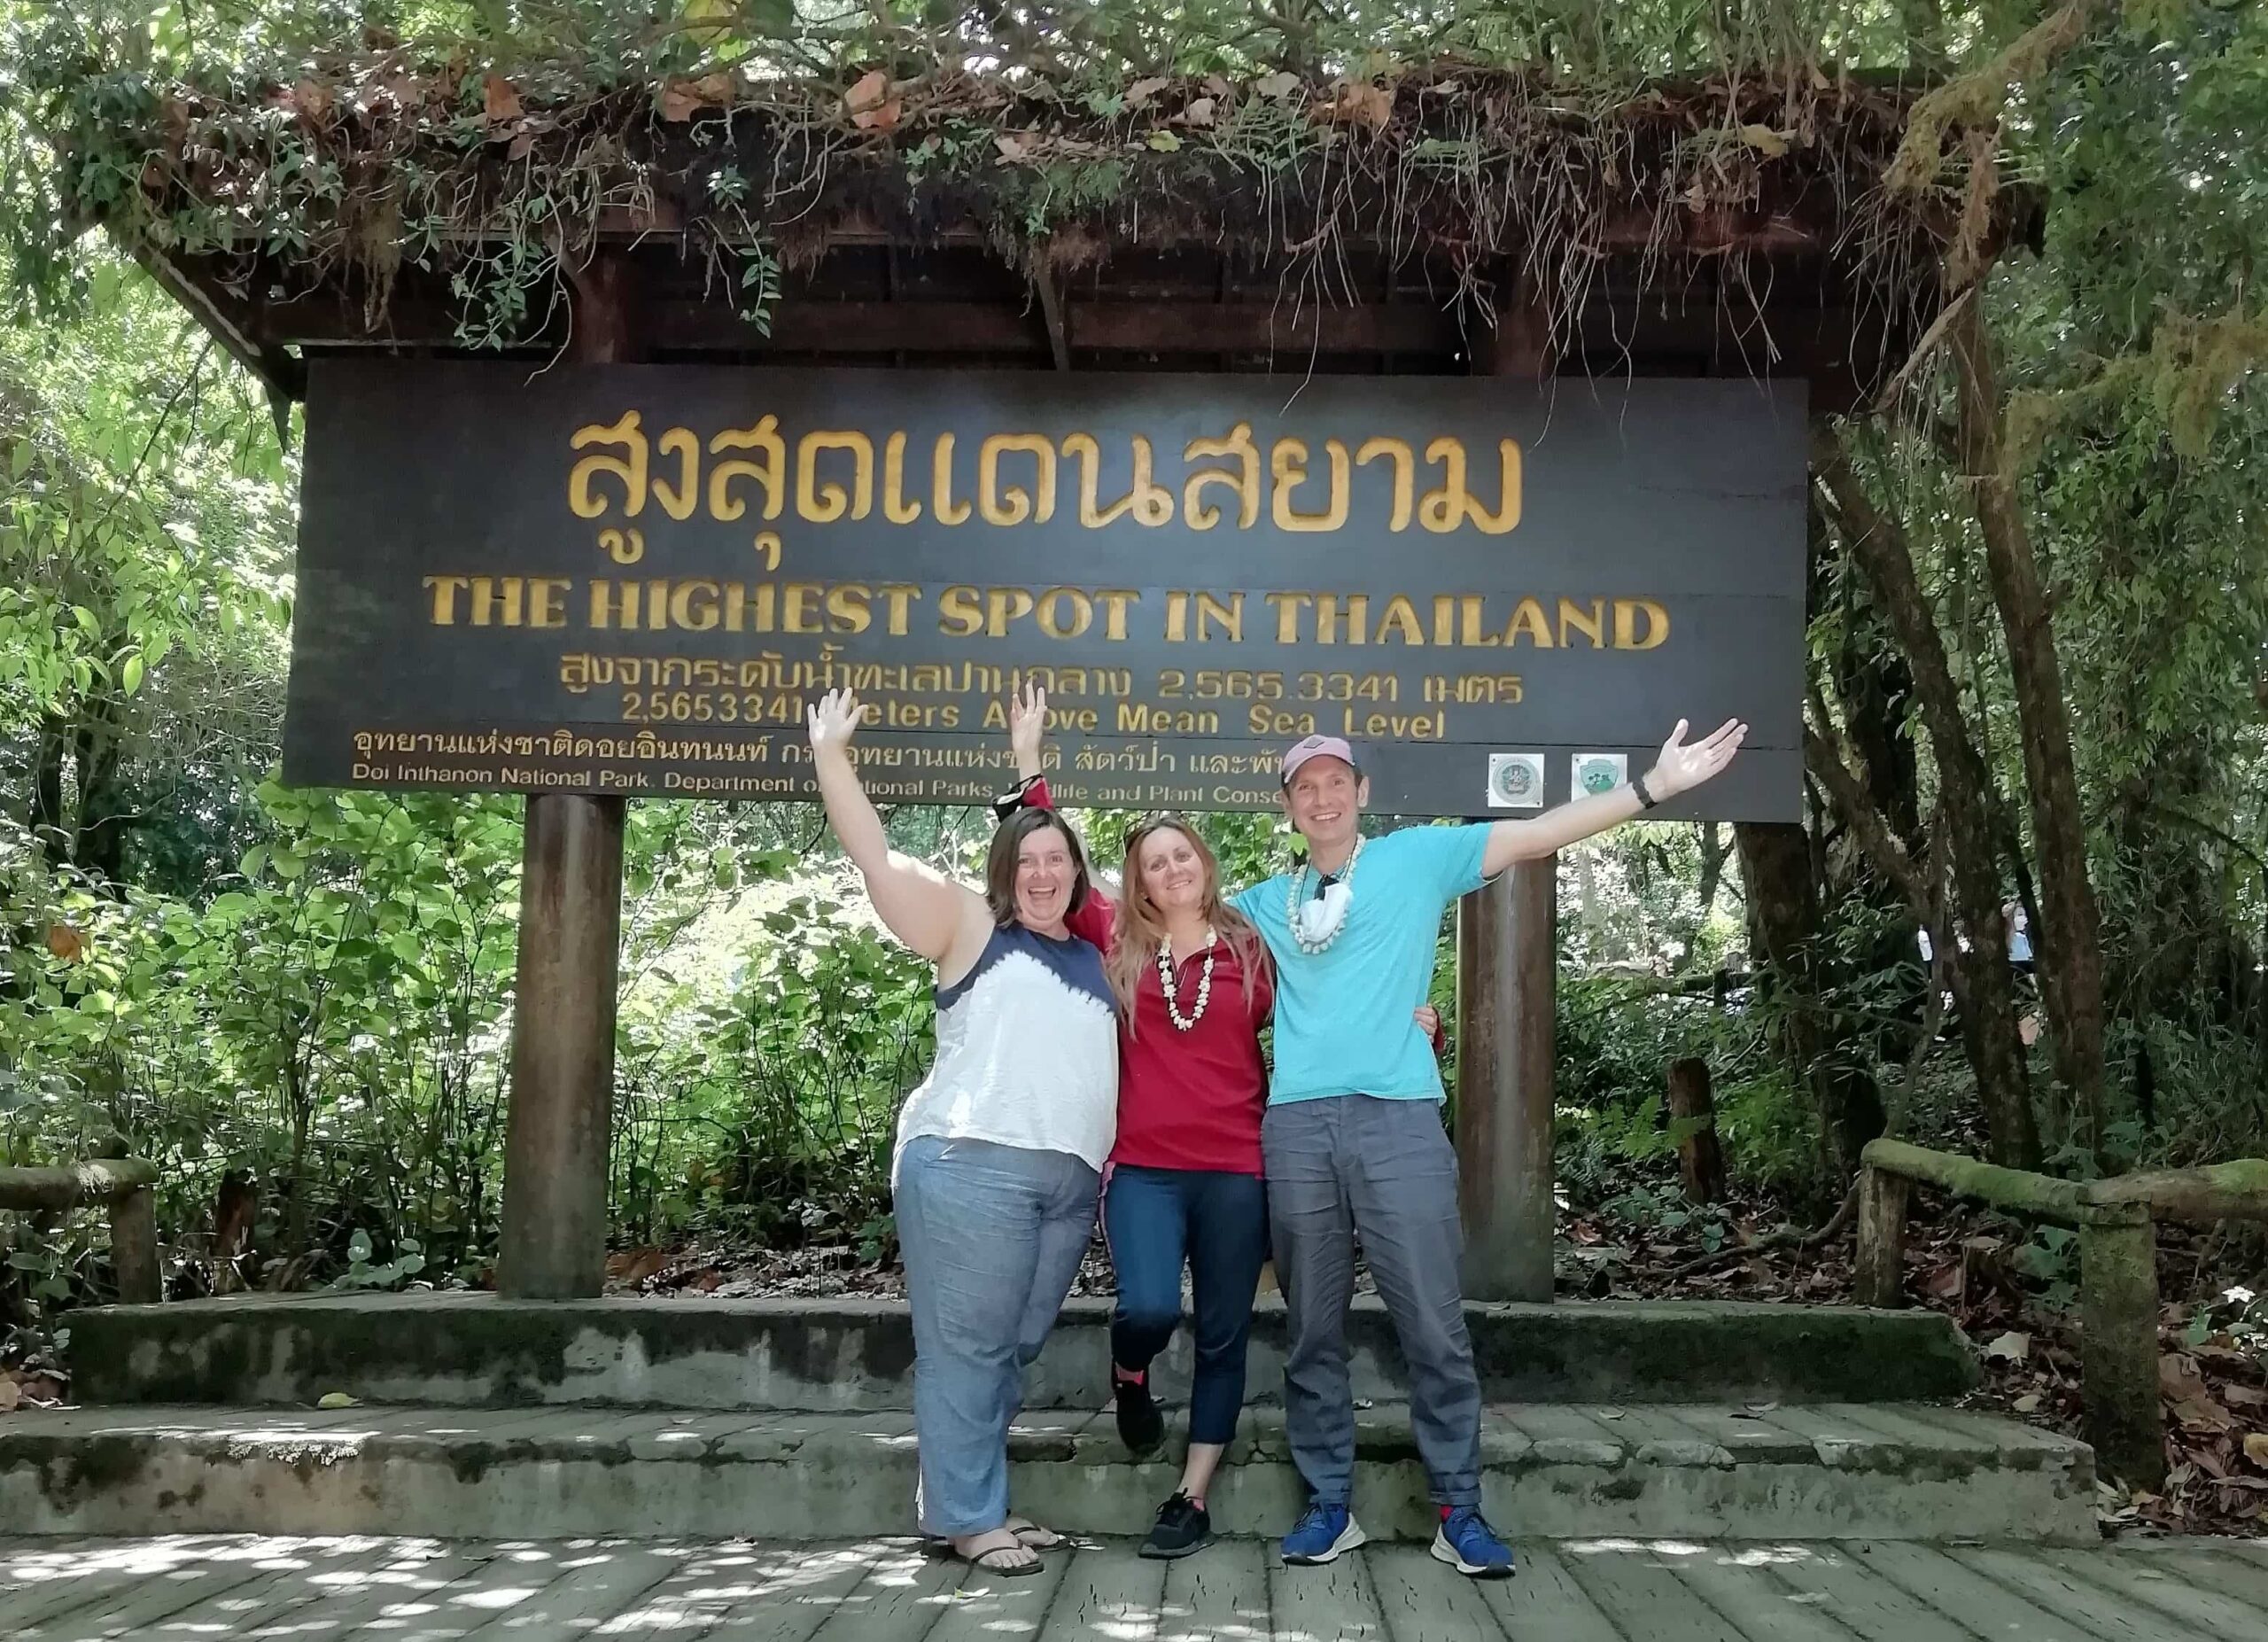 Us at the highest point in Thailand at Doi Inthanon